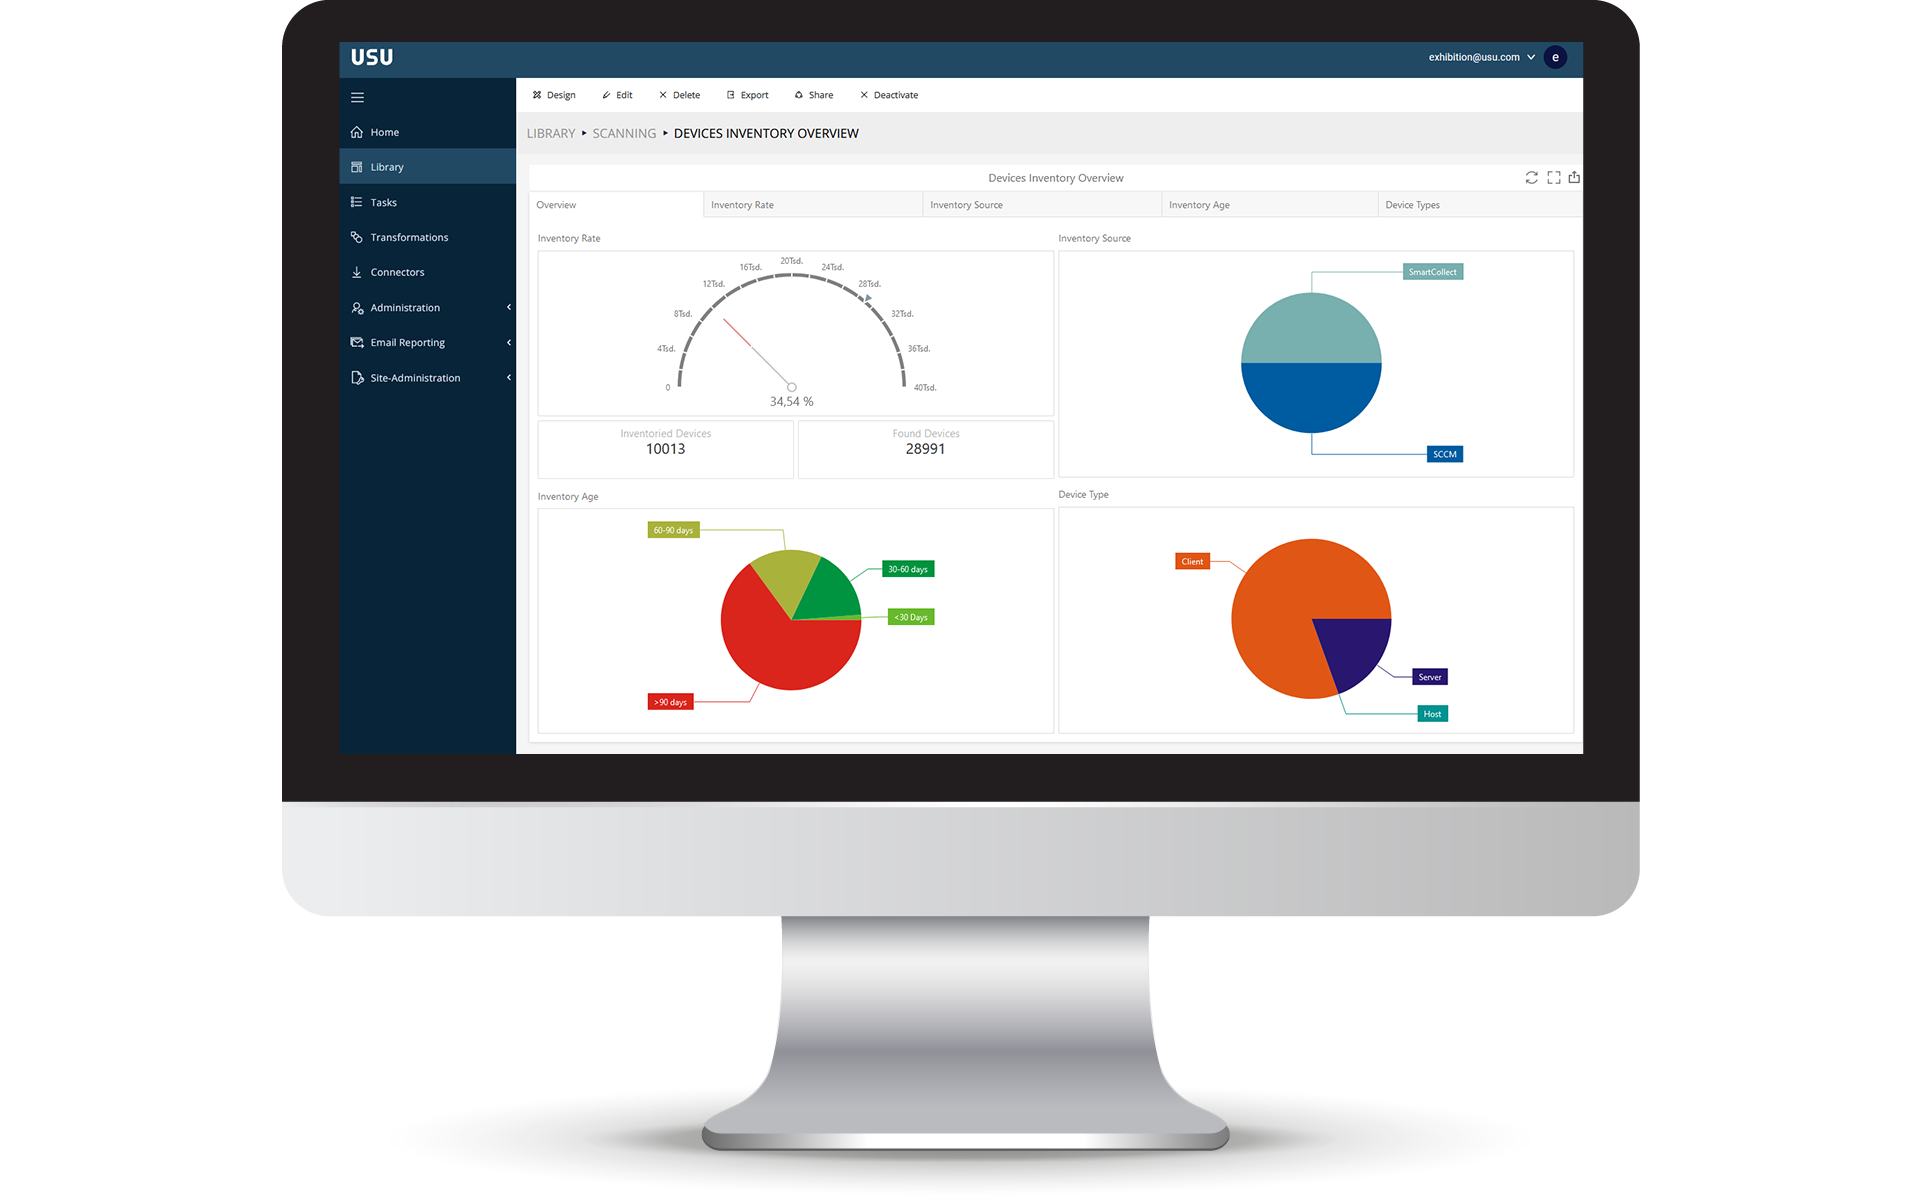 USU Software Asset Management - Discovery IT